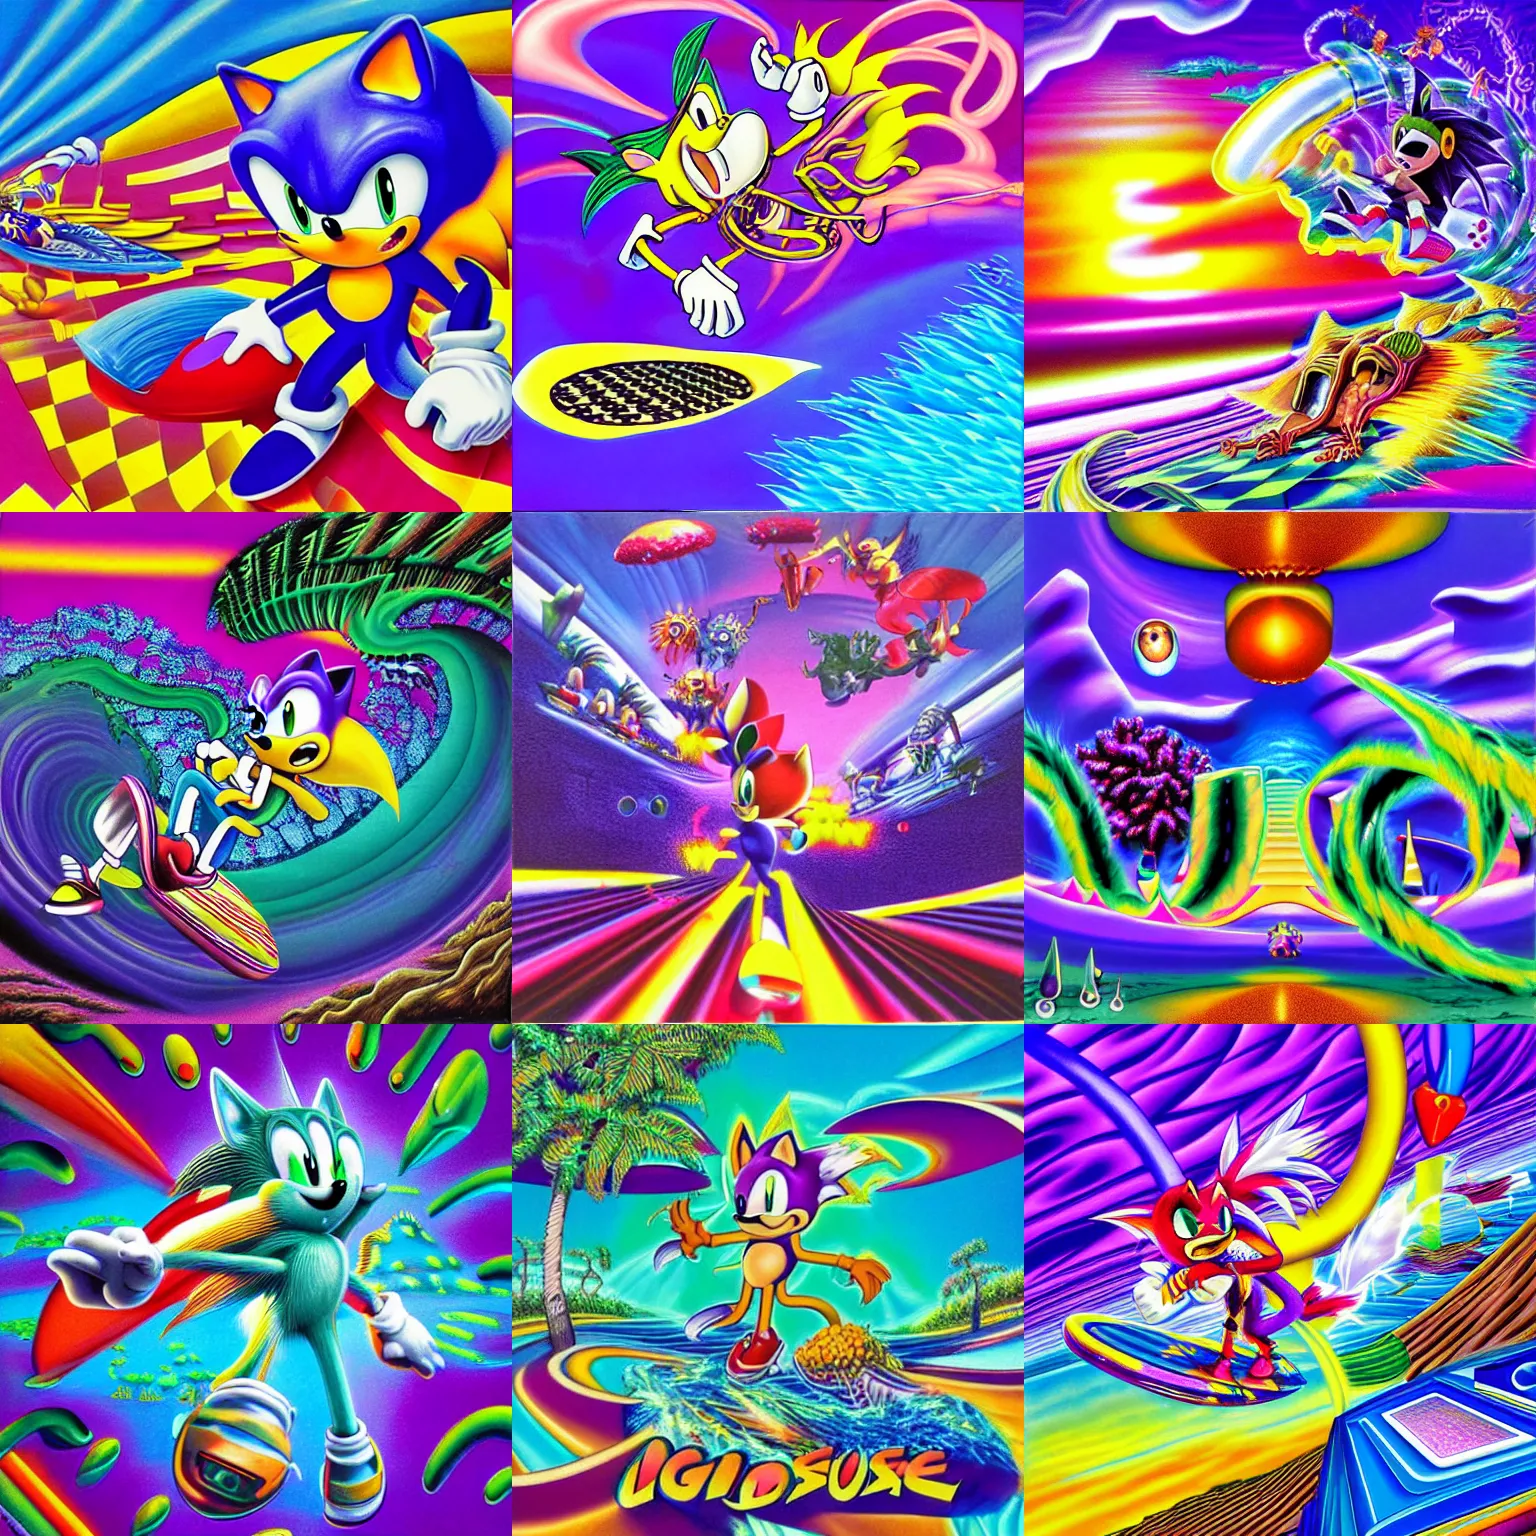 Prompt: surreal, detailed professional, high quality airbrush art mgmt album cover of a liquid dissolving airbrush art lsd dmt sonic the hedgehog surfing through cyberspace, purple checkerboard background, 1 9 8 0 s 1 9 8 2 sega genesis video game album cover